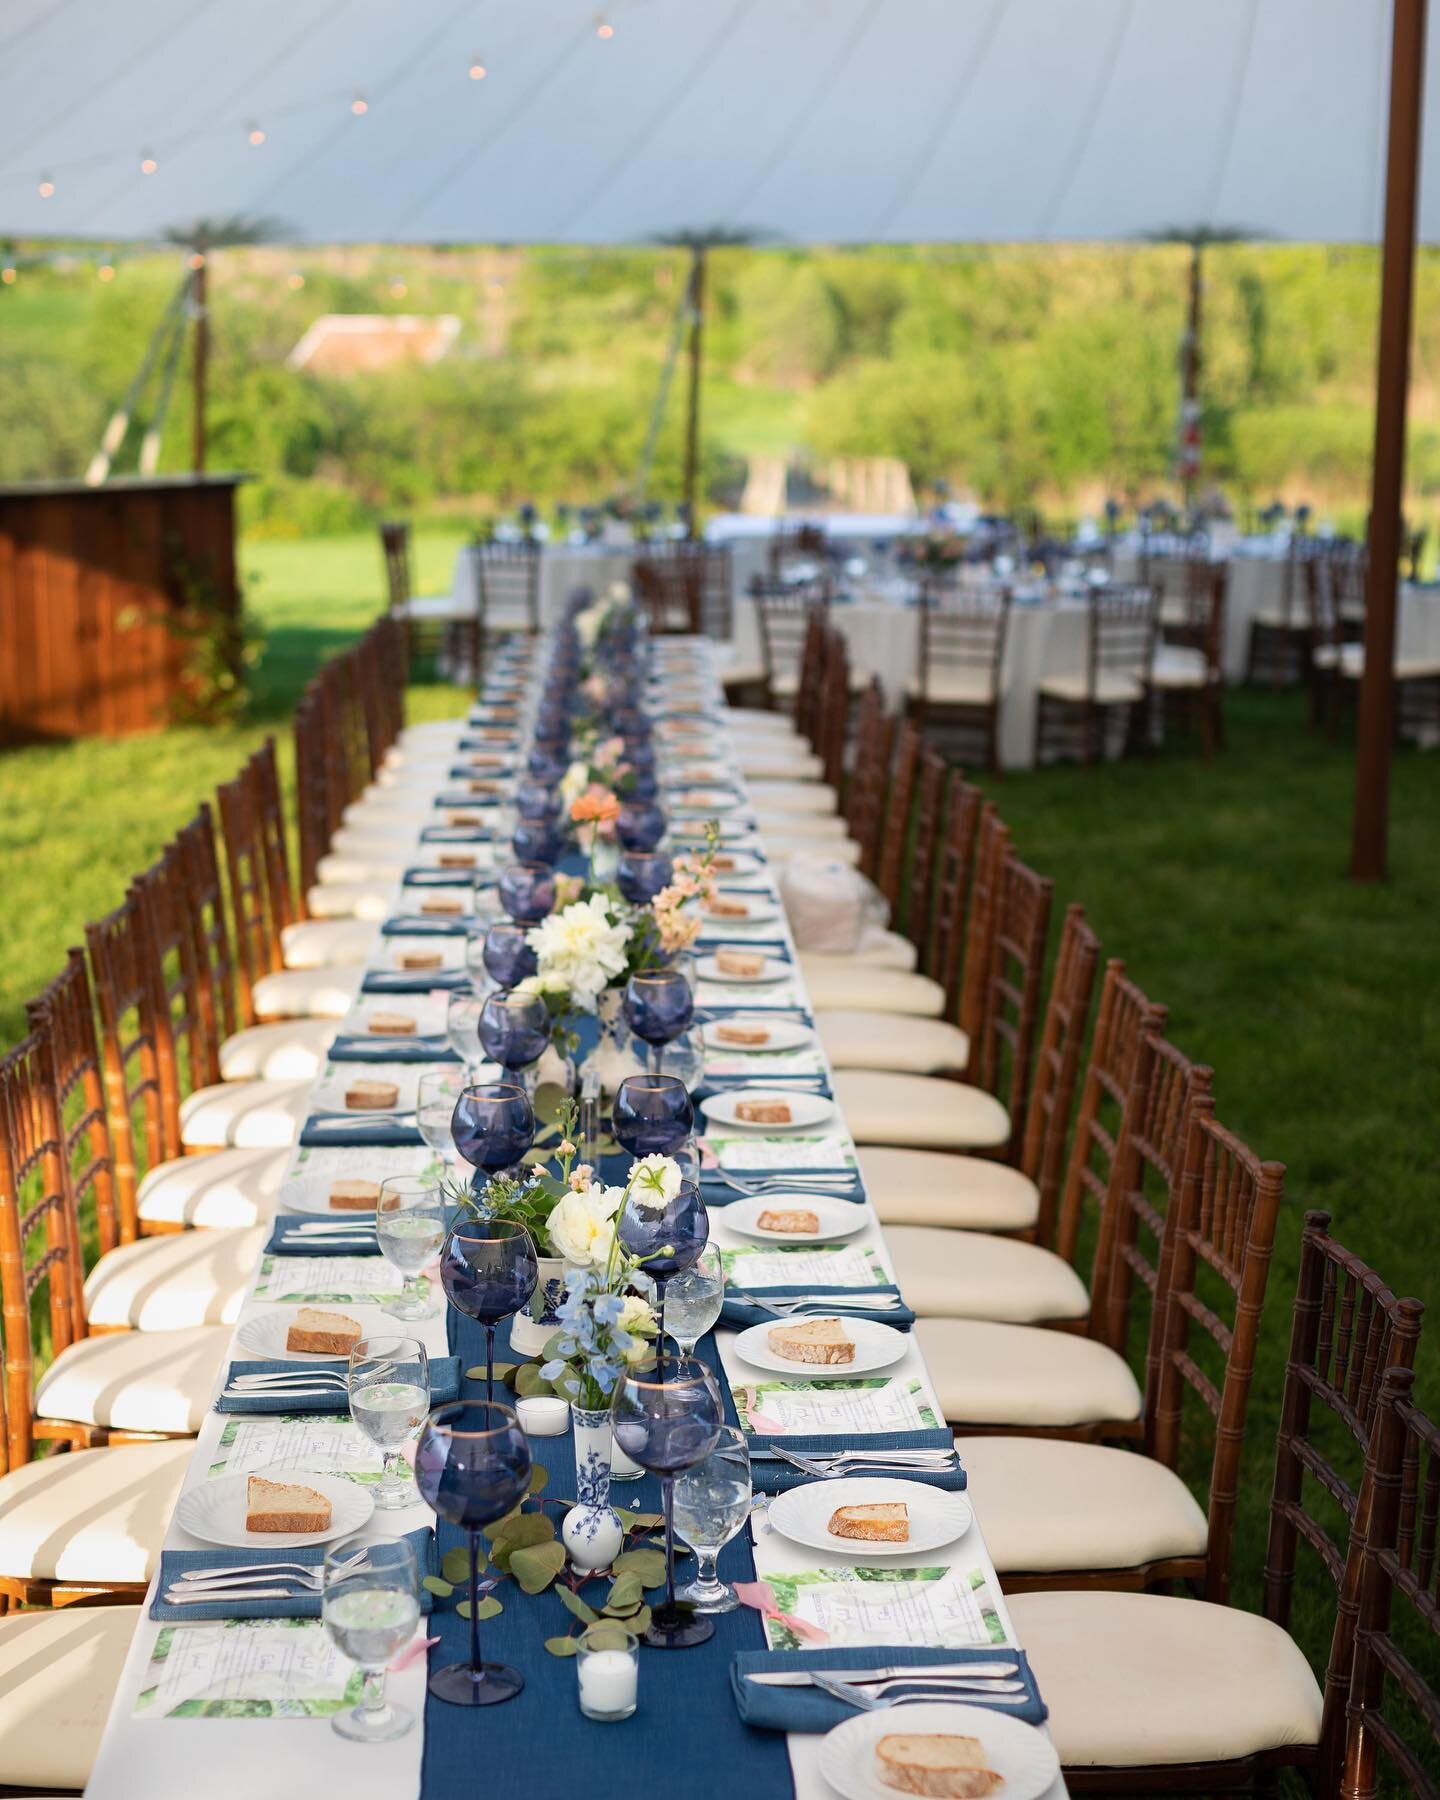 For the last year and a half we have been adding to our rental collection! These beautiful blue and white ginger vases are available for rent! They were the perfect addition to this head table, and two of our large vases for ceremony and moved to rec